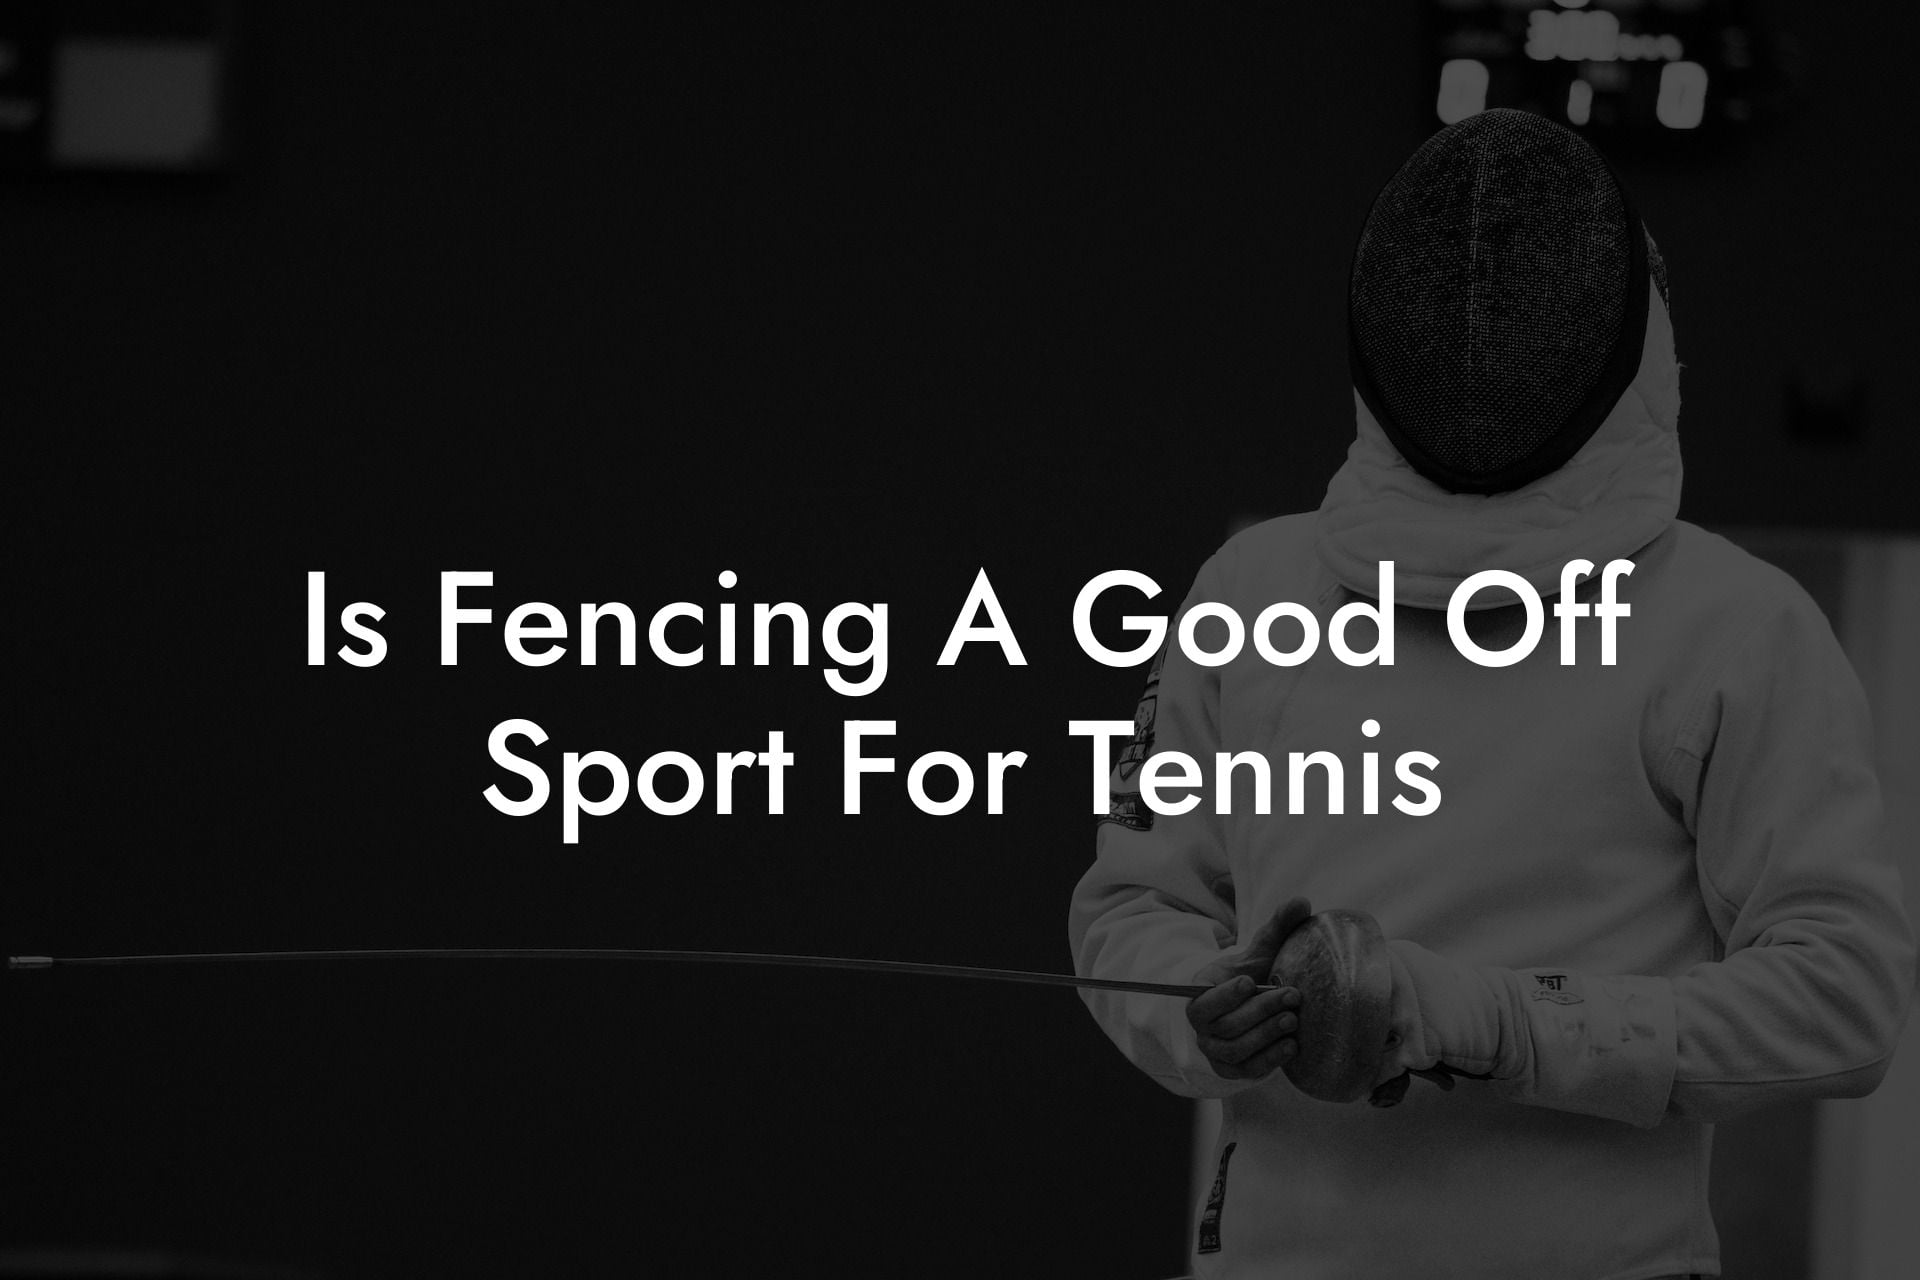 Is Fencing A Good Off Sport For Tennis